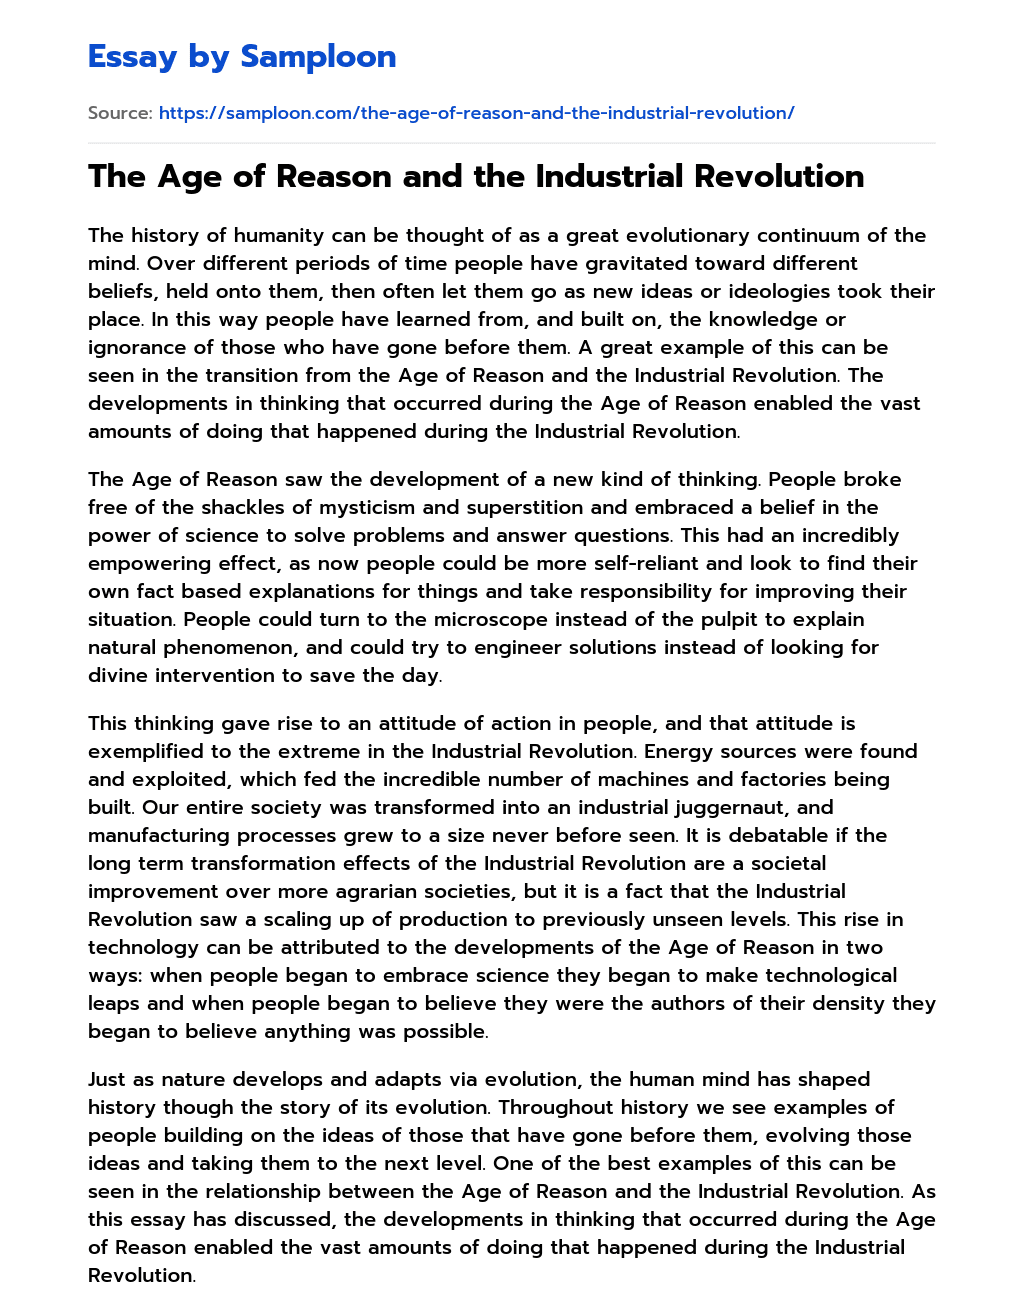 The Age of Reason and the Industrial Revolution essay